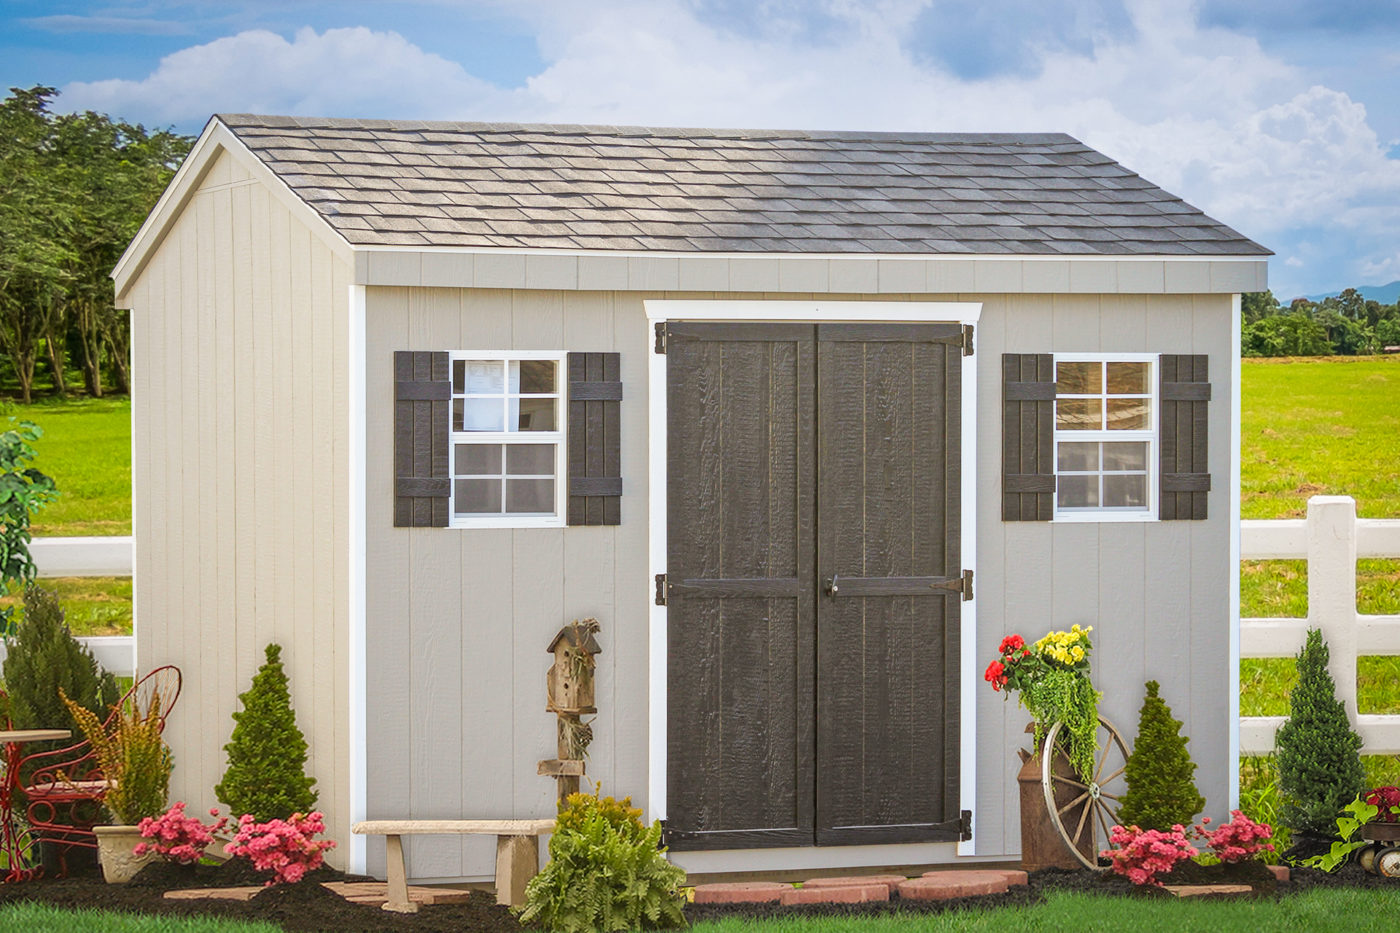 An outdoor shed kit for sale wood siding